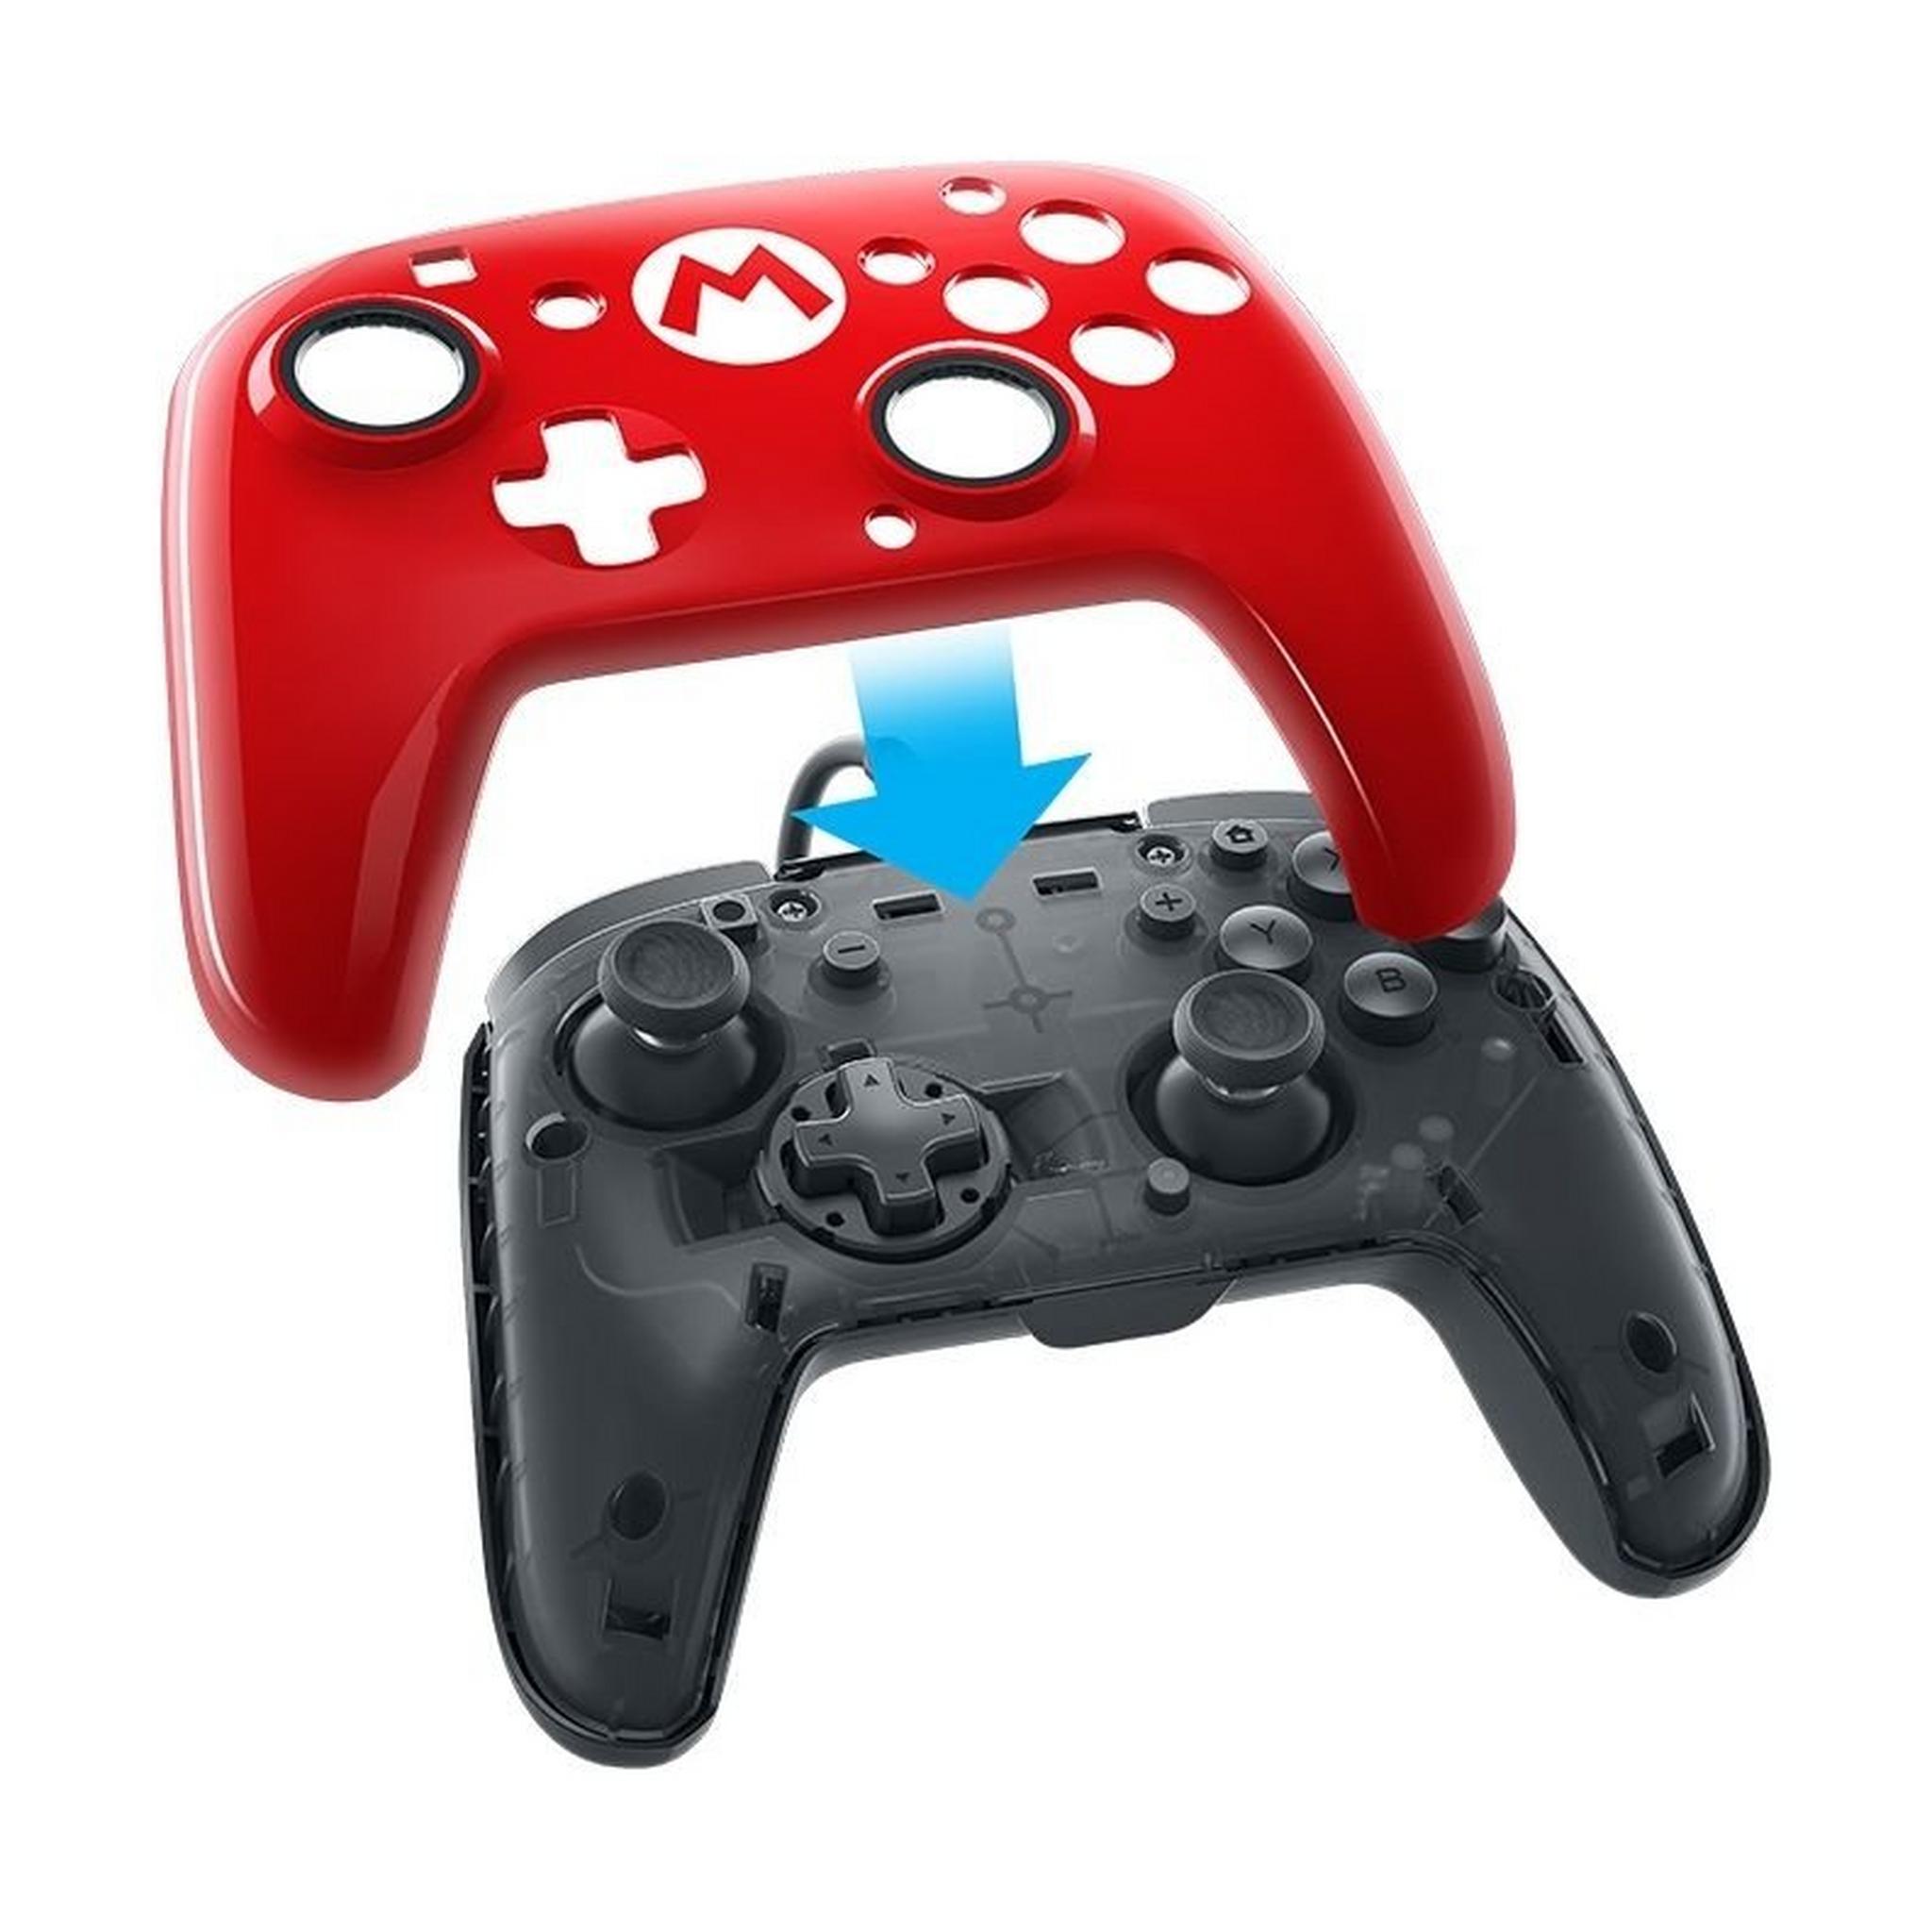 PDP Faceoff Wired Pro Controller For Nintendo Switch - Mario